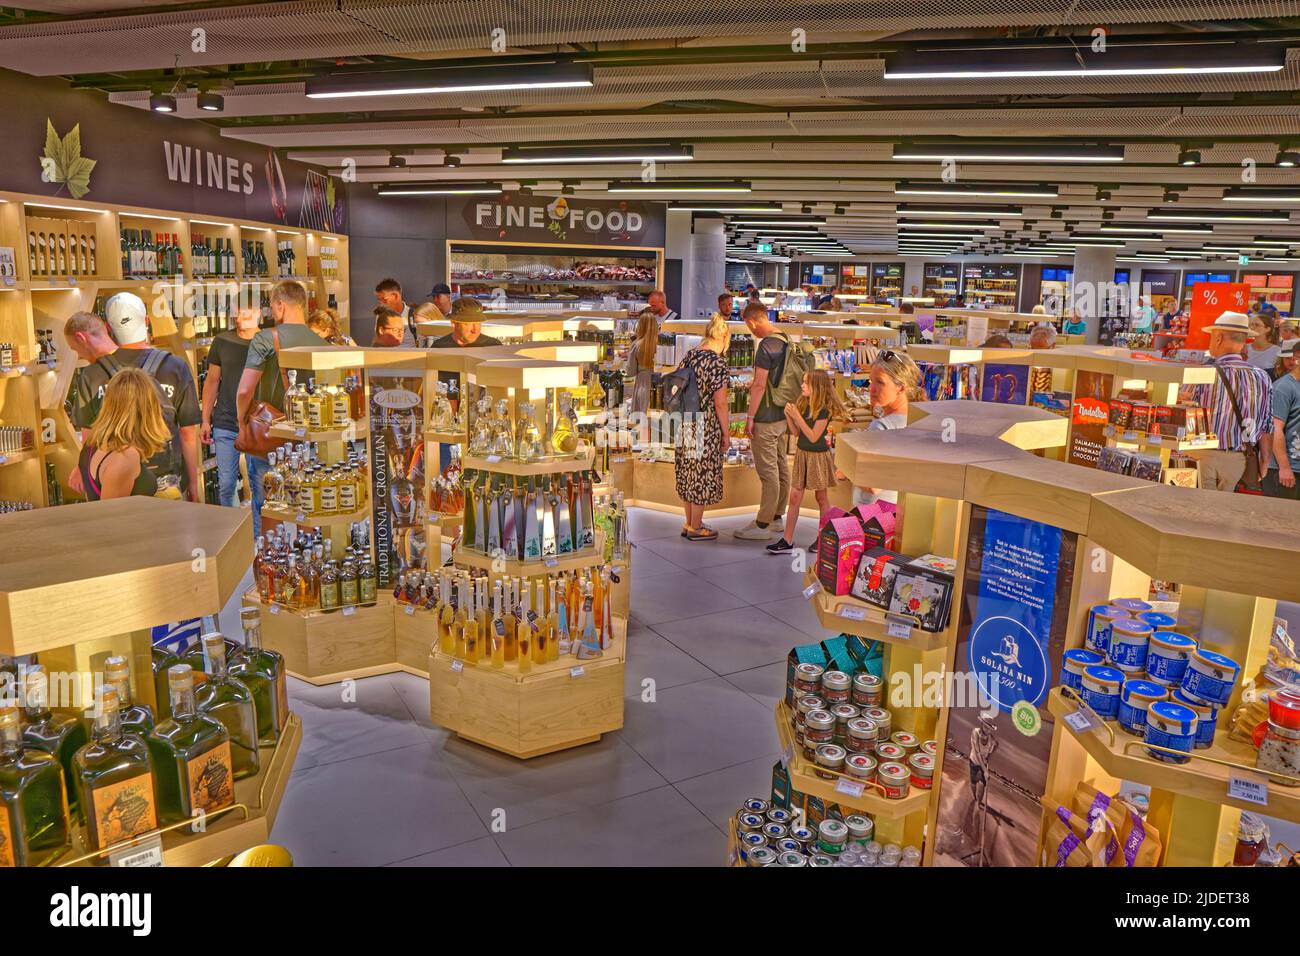 Duty Free shopping at Resnik Airport, Croatia or Split Airport as it is commonly known. Stock Photo